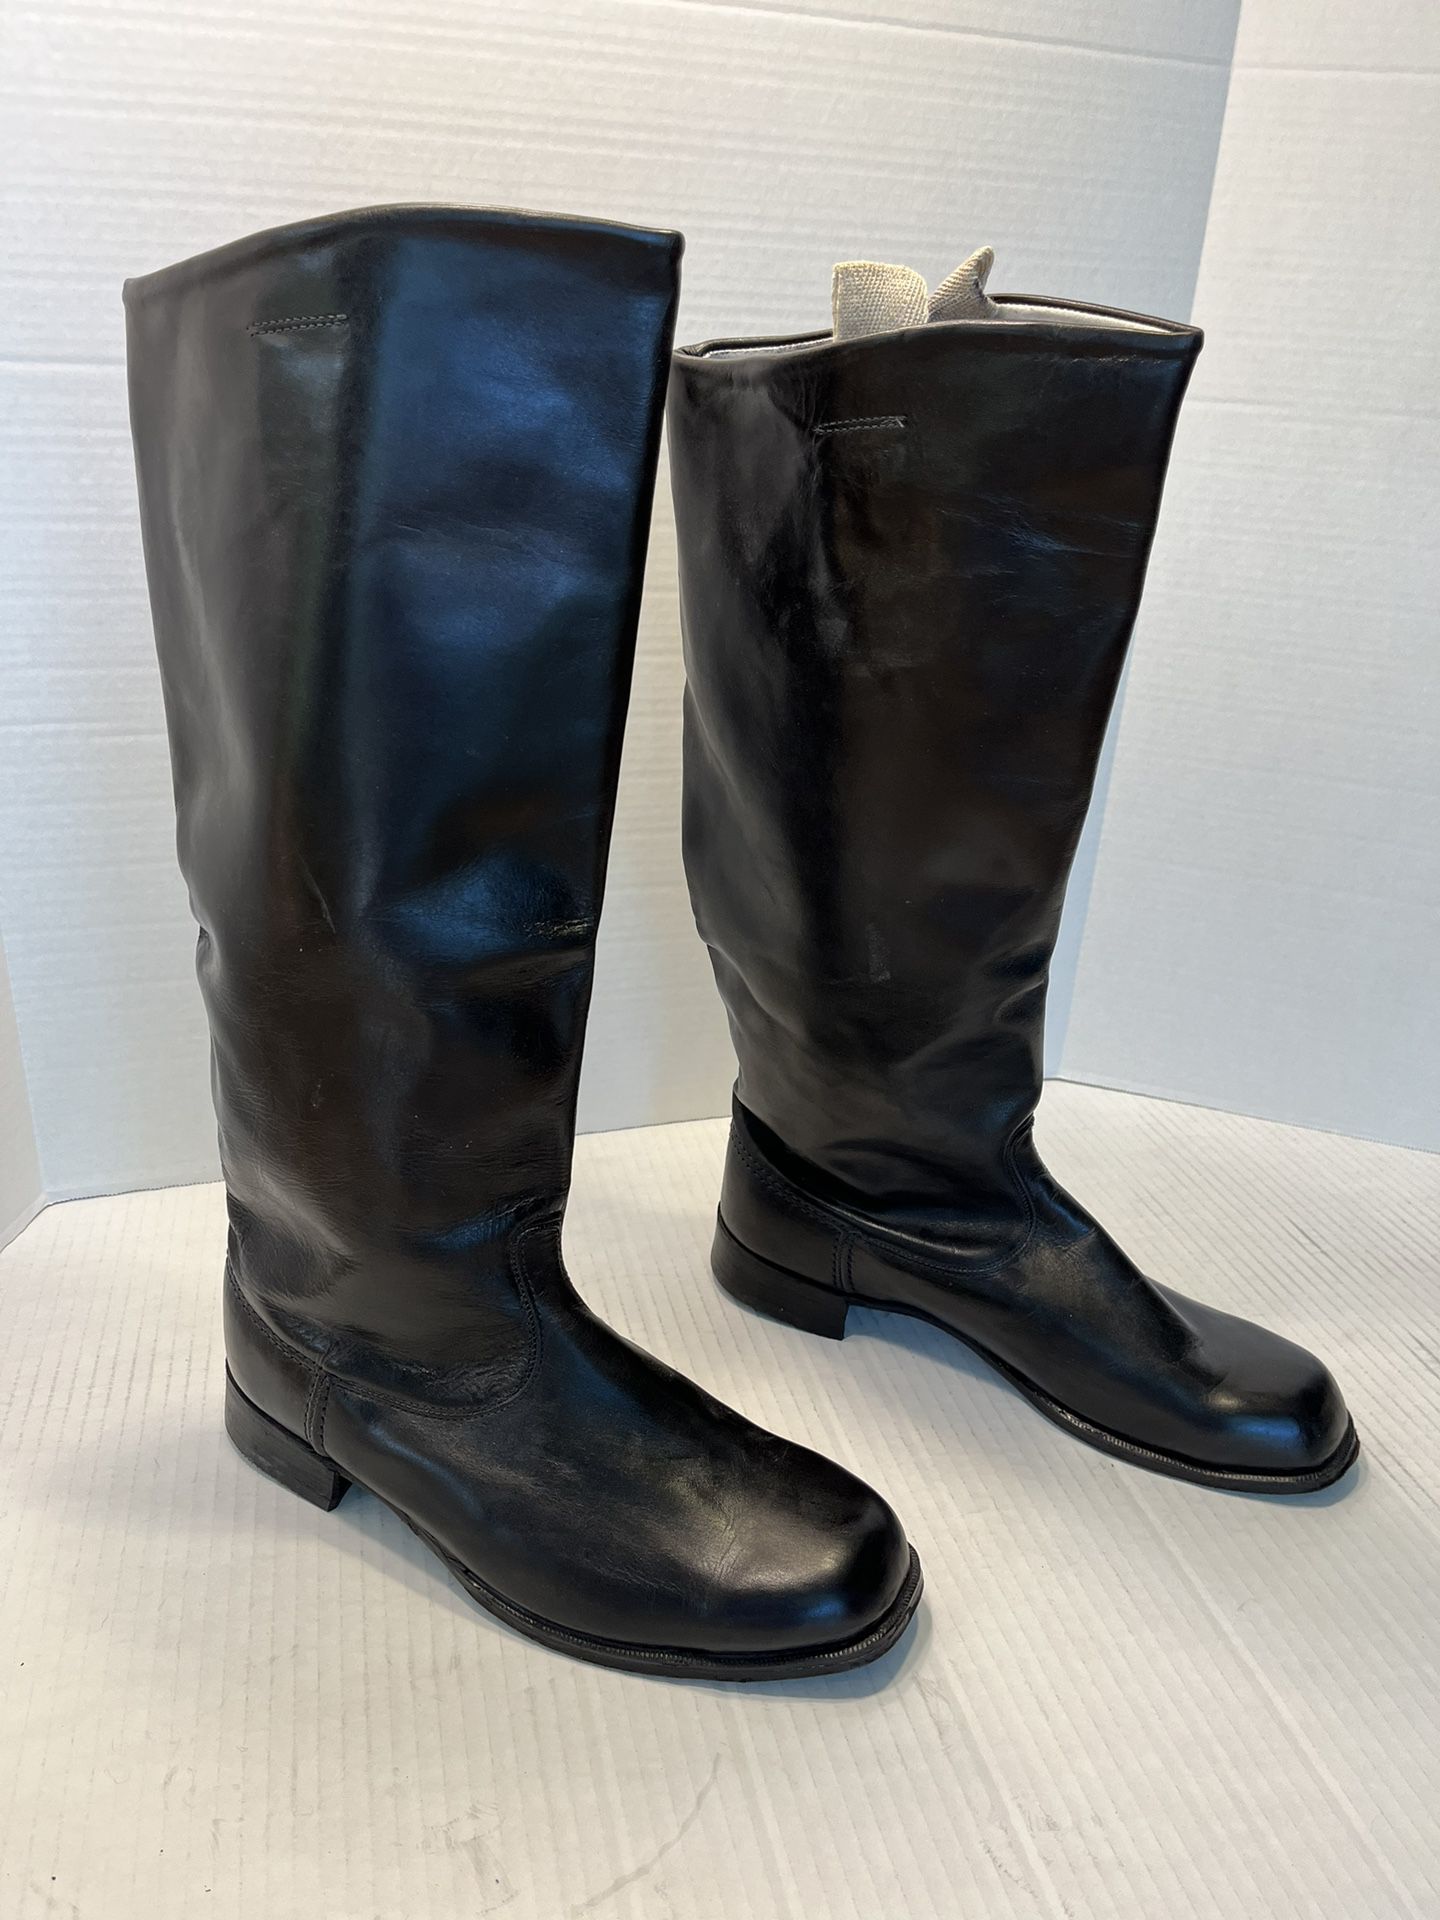 Men’s Knee High Leather Riding Boots Size 101/2-11